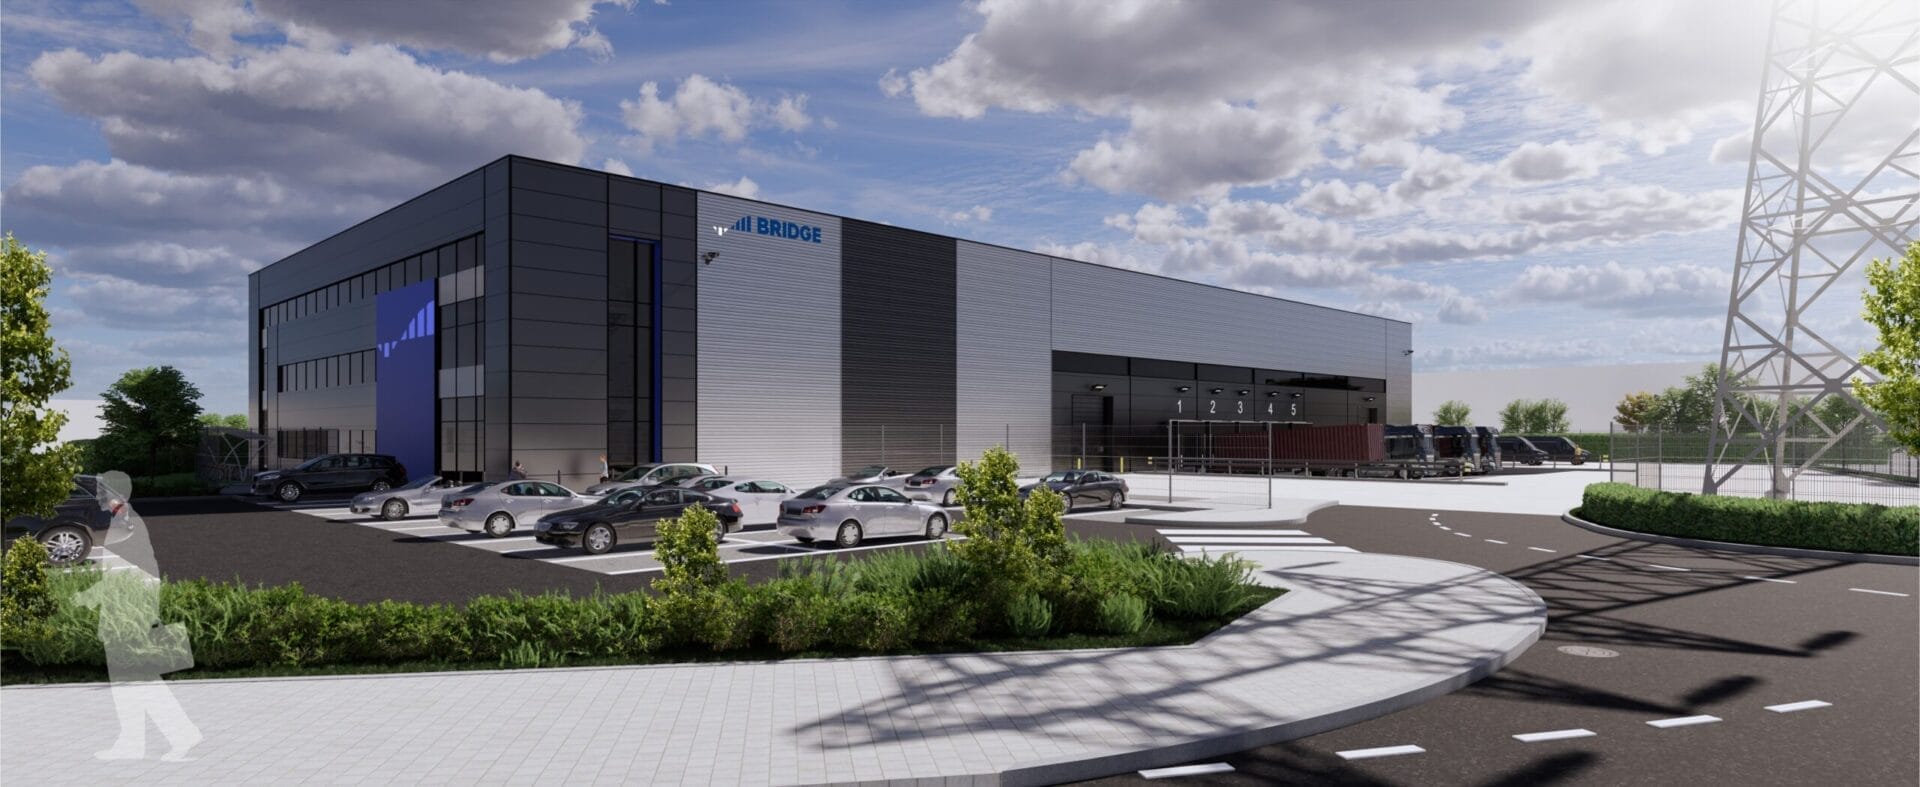 Bridge Industrial Makes its Fifth and Largest UK Site Acquisition for Development Acquired in Weybridge